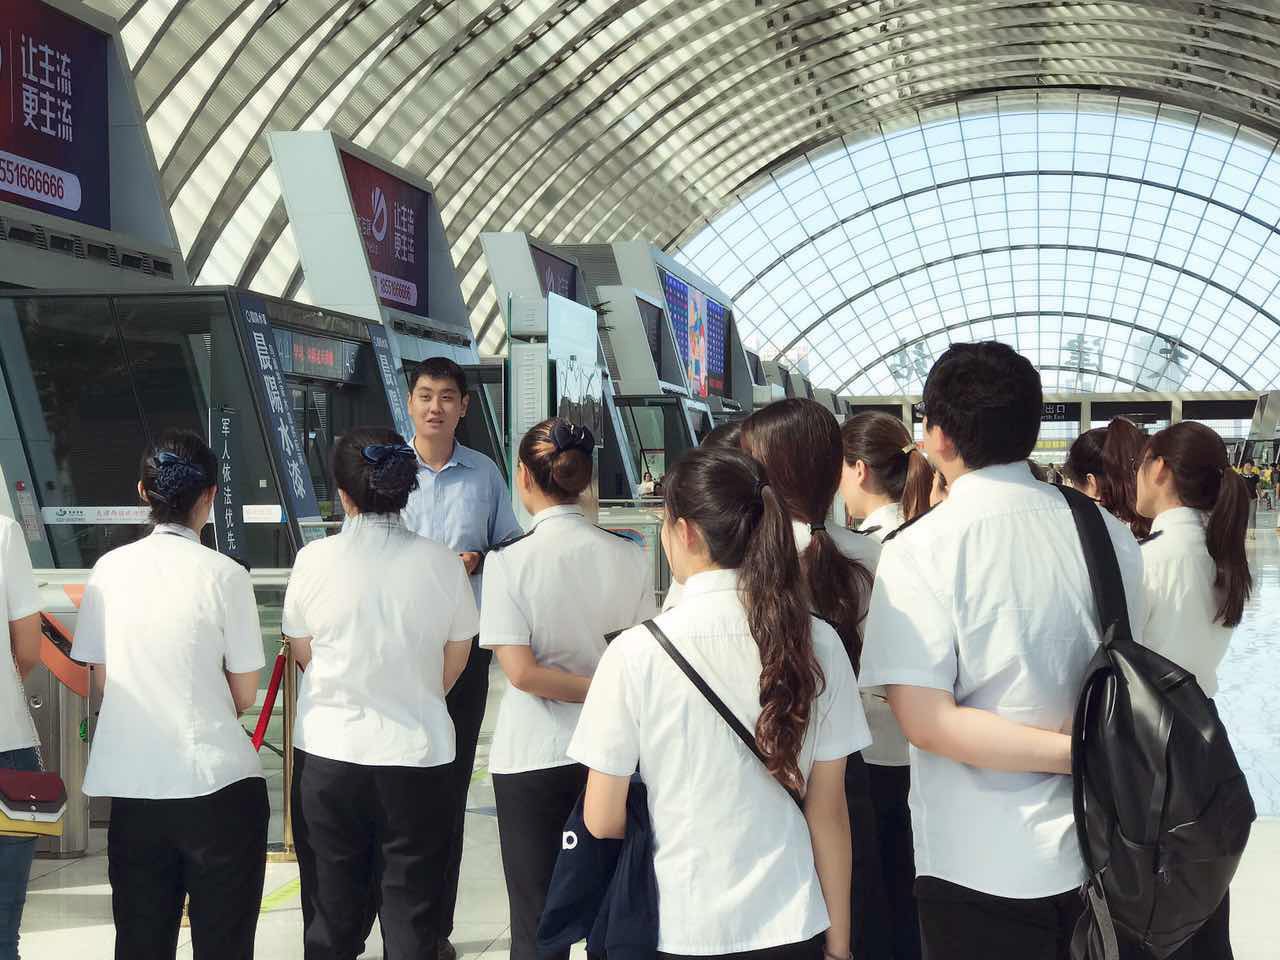 An image of David Feng presenting a "live" Rail English session at Tianjin West